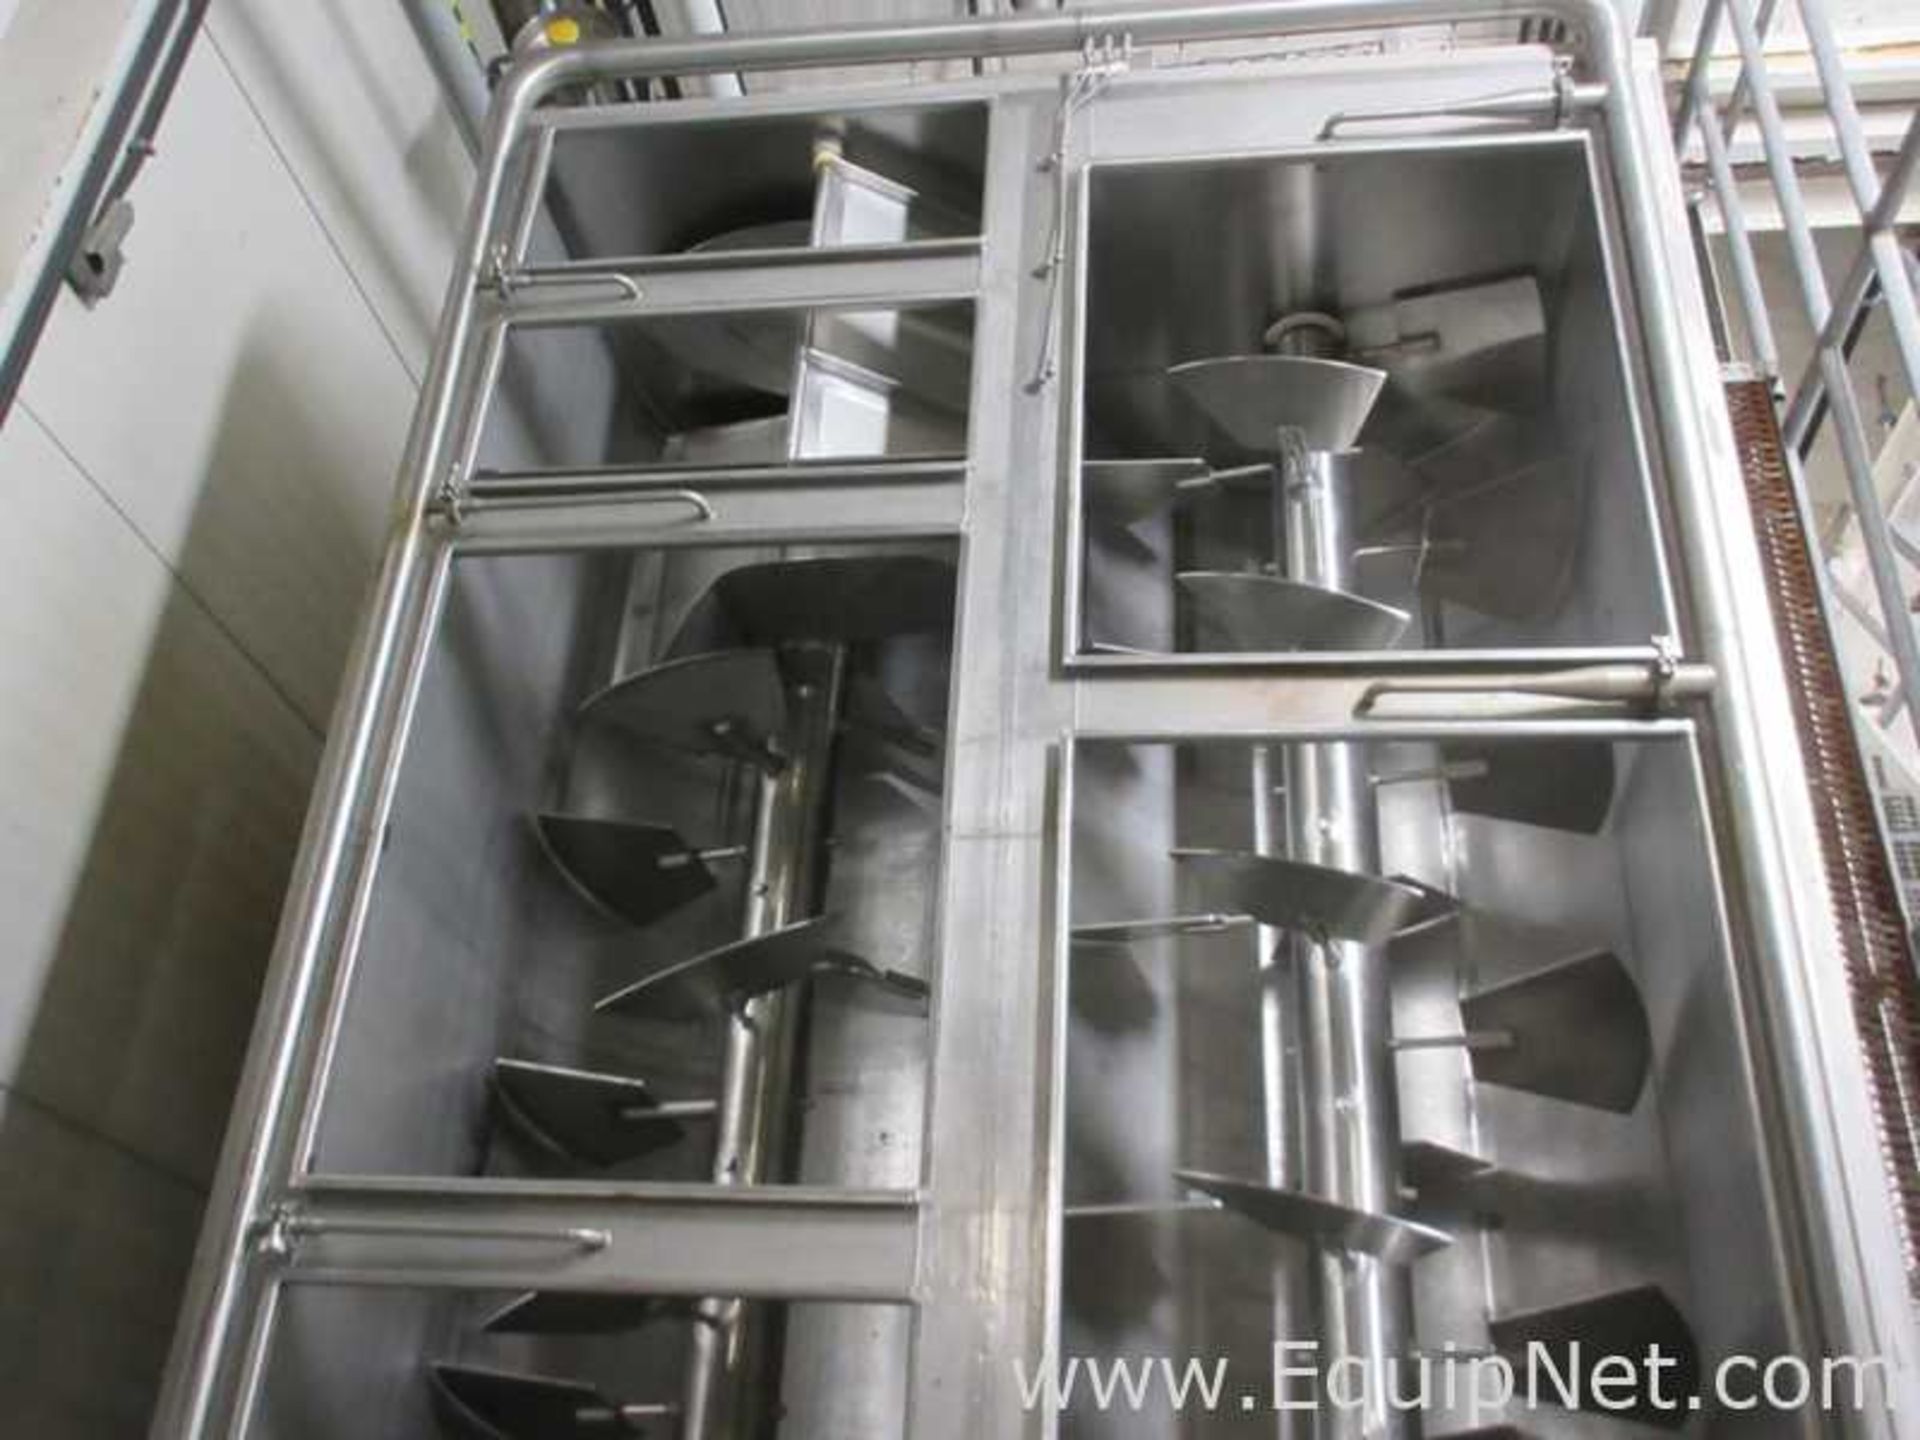 Apache Stainless Twin Shaft Paddle Blender - Image 12 of 12